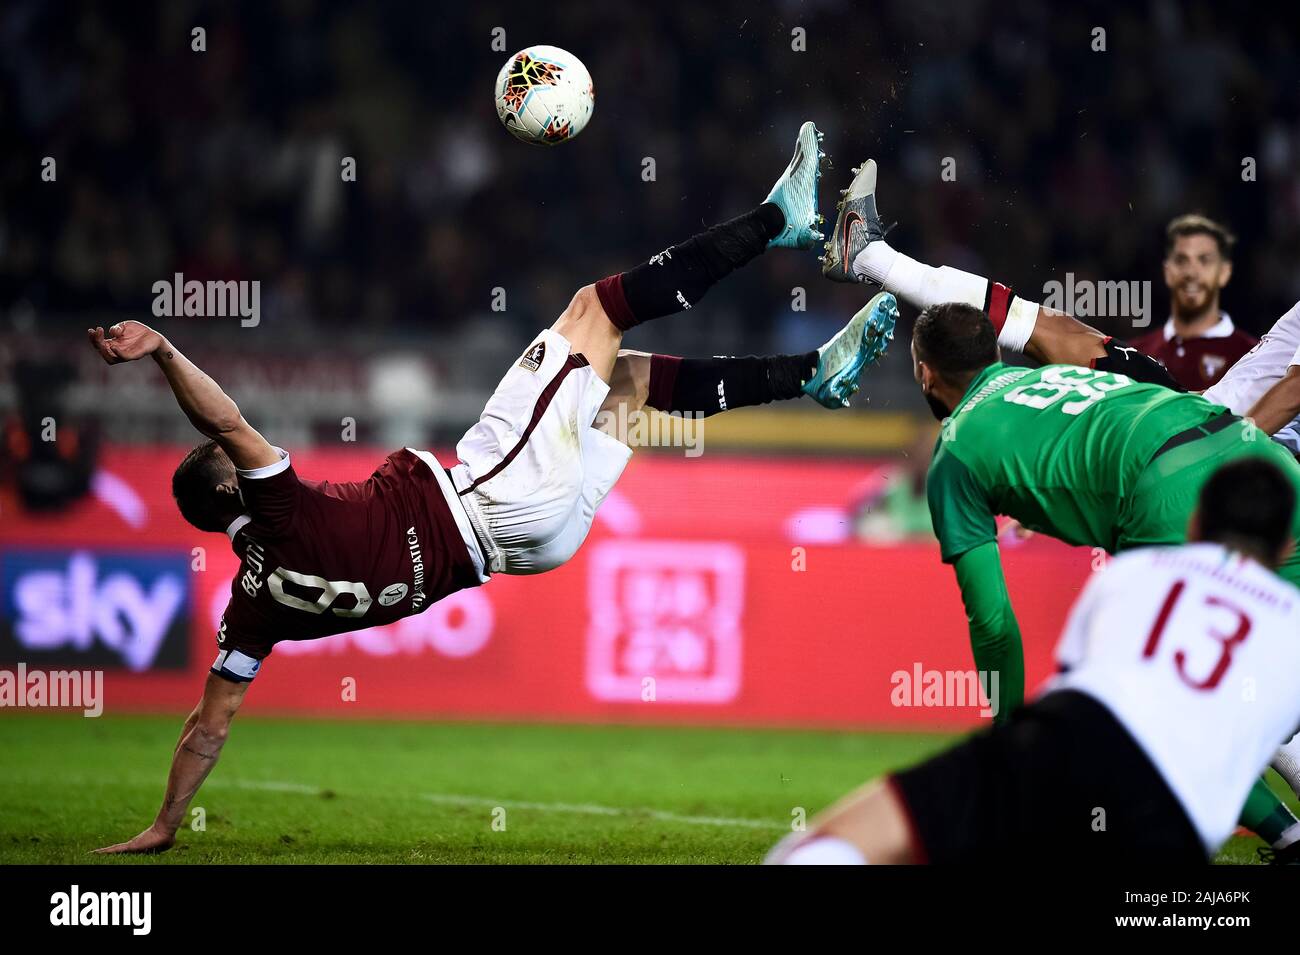 Turin, Italy. 26 September, 2019: Andrea Belotti of Torino FC scores a goal from an bicycle kick during the Serie A football match between Torino FC and AC Milan. Torino FC won 2-1 over AC Milan. Credit: Nicolò Campo/Alamy Live News Stock Photo